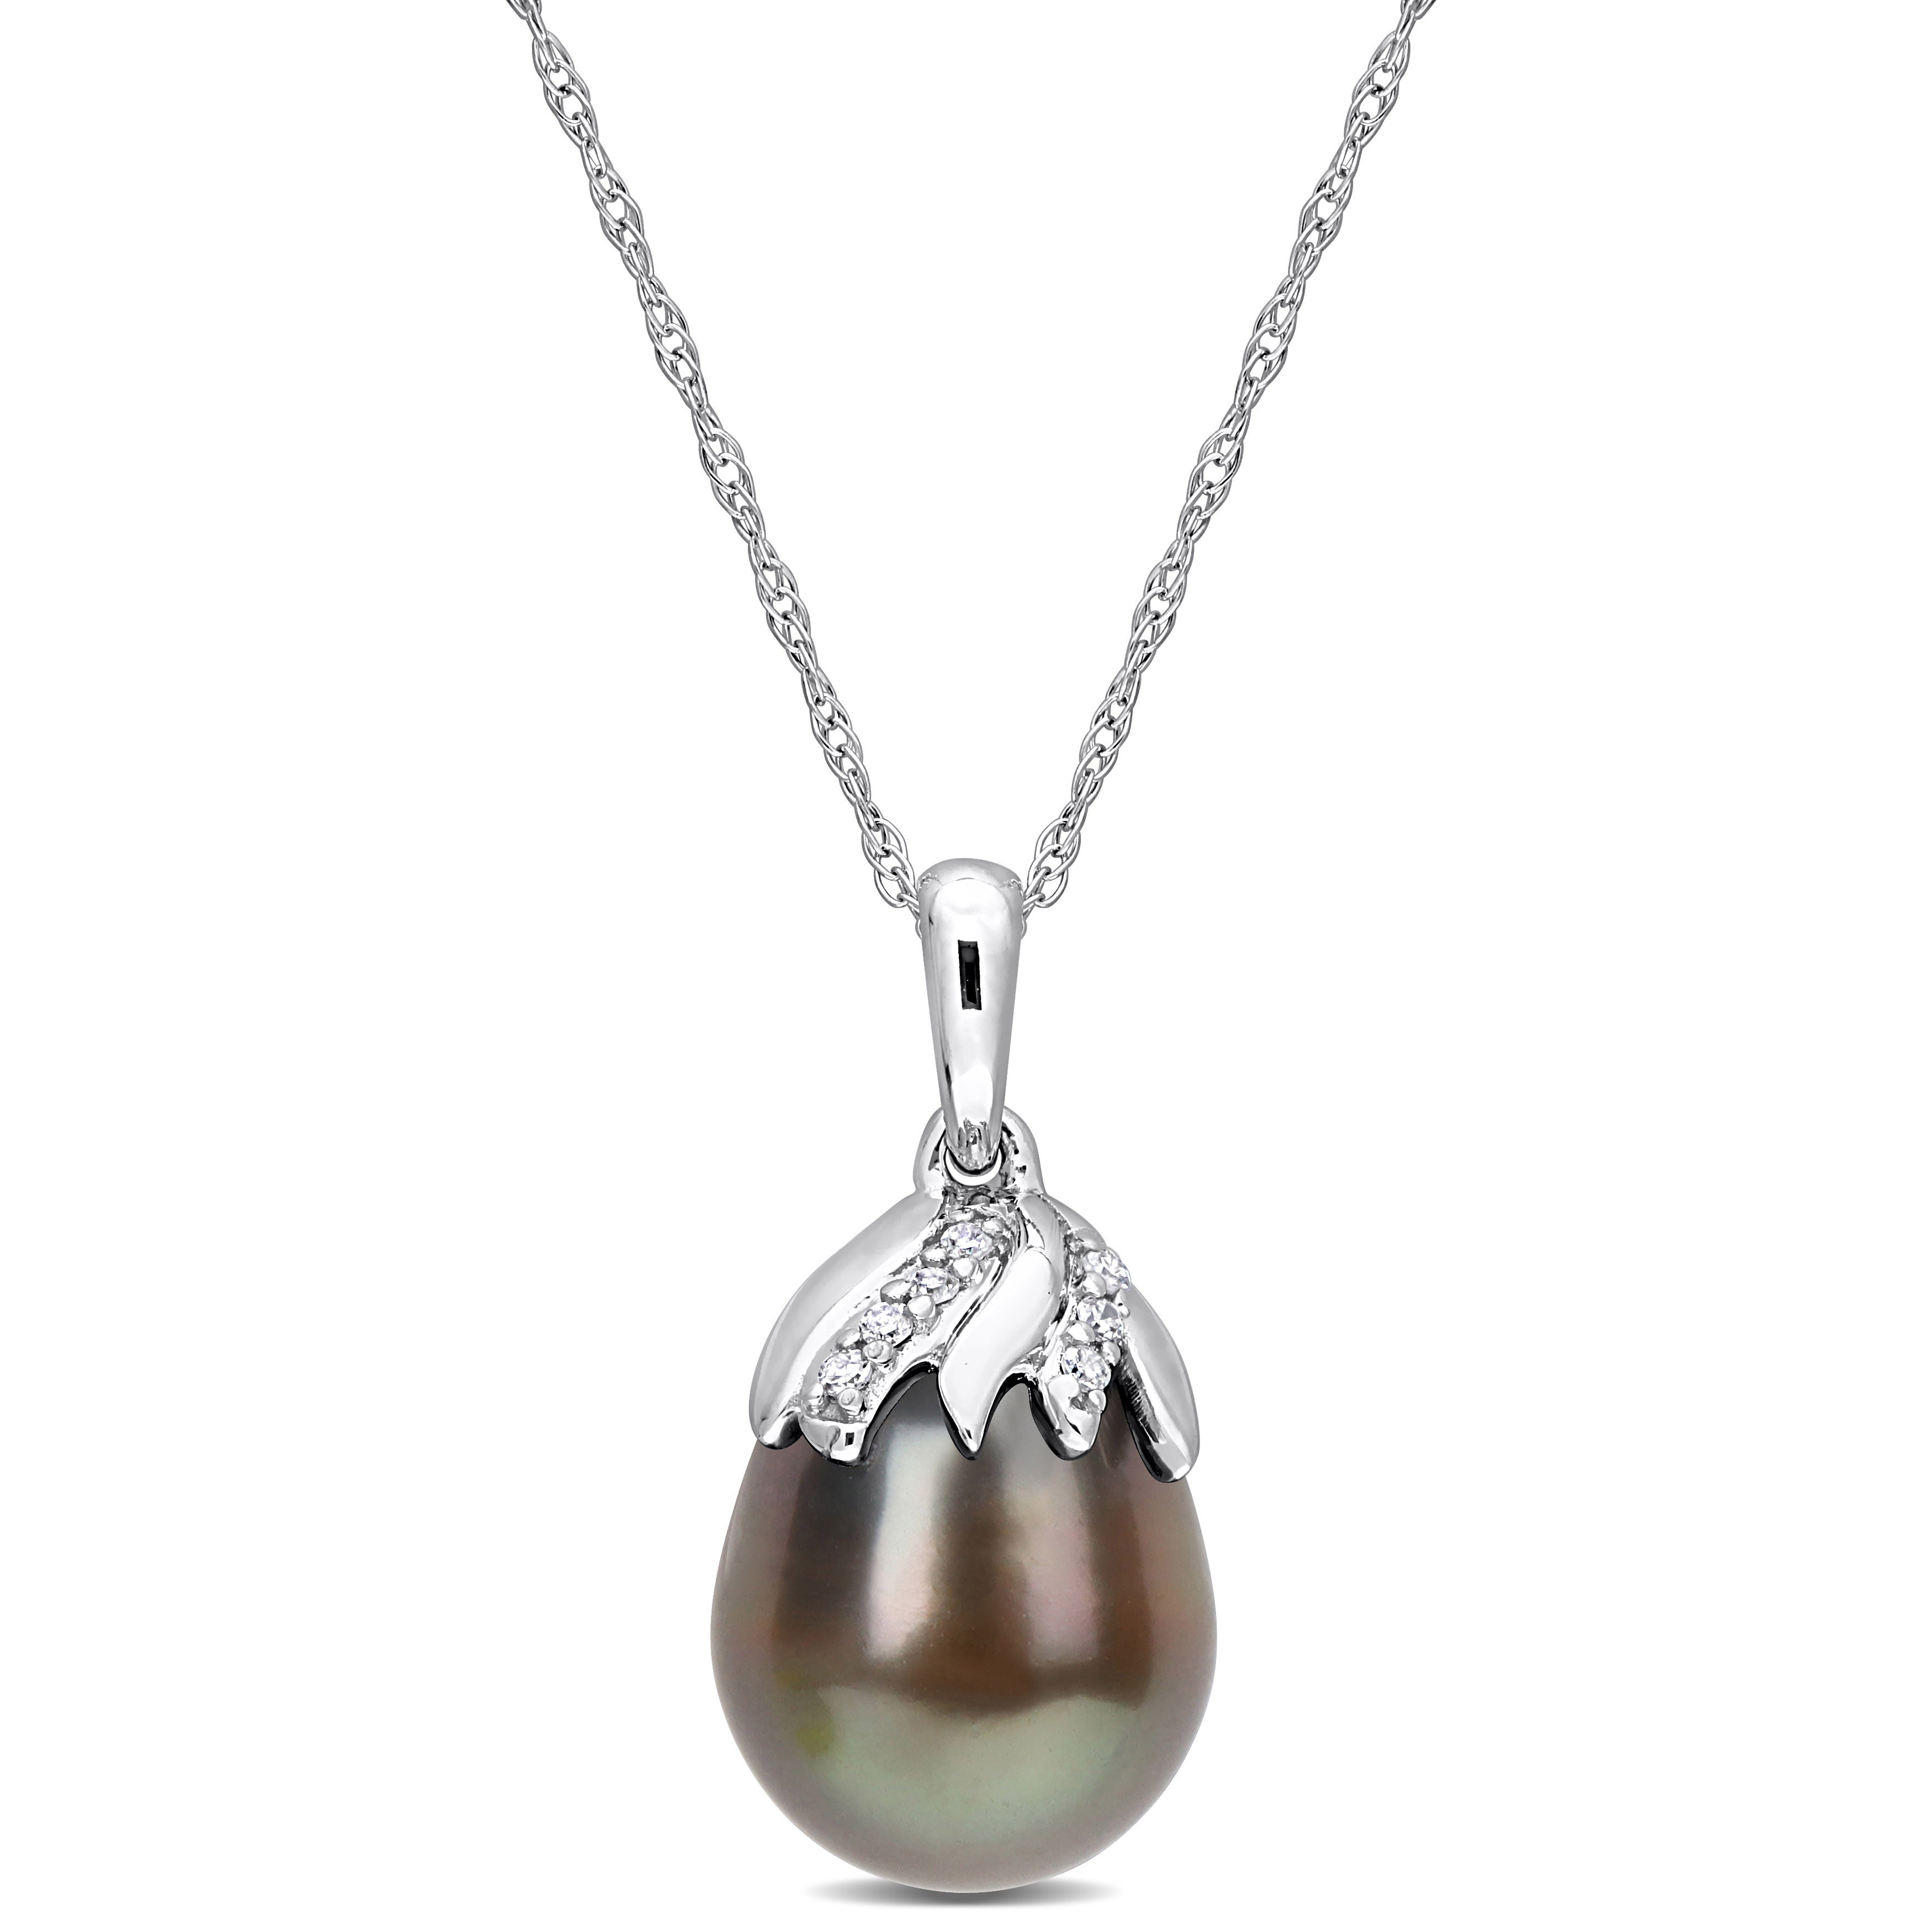 9-10 MM Black Tahitian Cultured Pearl & Diamond Accent Pendant with Chain in 14k White Gold - 17 in.